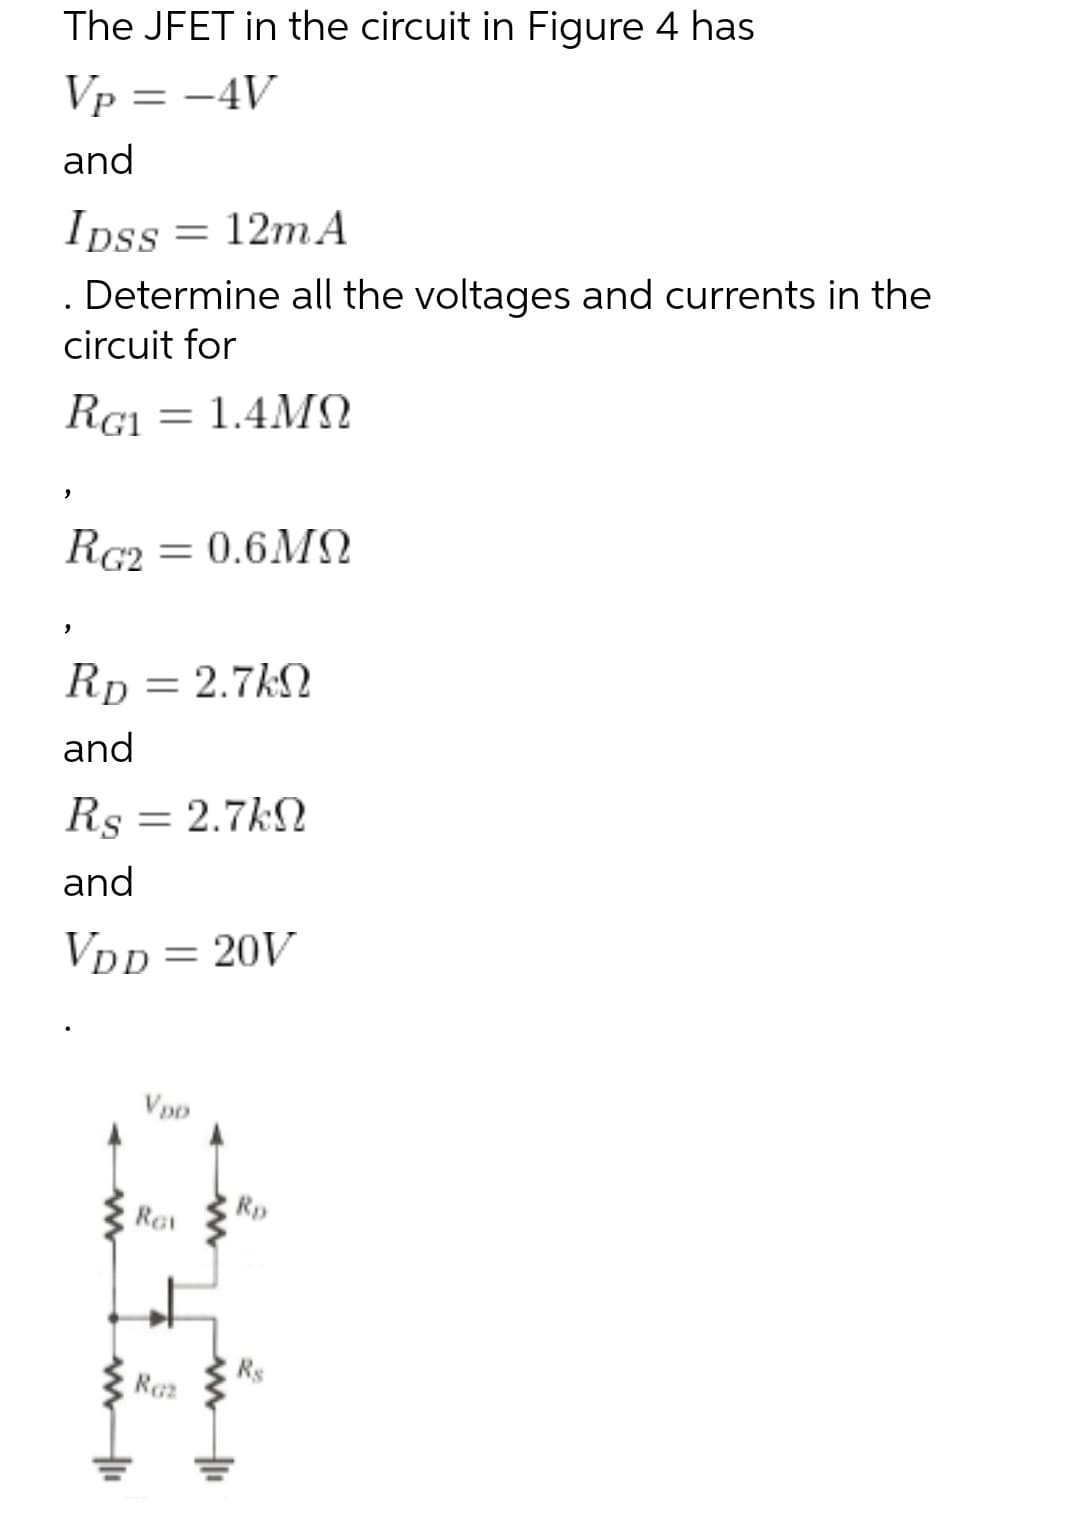 The JFET in the circuit in Figure 4 has
Vp = -4V
and
12m A
Ipss
. Determine all the voltages and currents in the
circuit for
RG1 = 1.4MN
RG2
= 0.6MQ
Rp = 2.7kN
and
Rs = 2.7kN
and
VDD = 20V
Vpo
Rp
Ret
Rs
Raz
